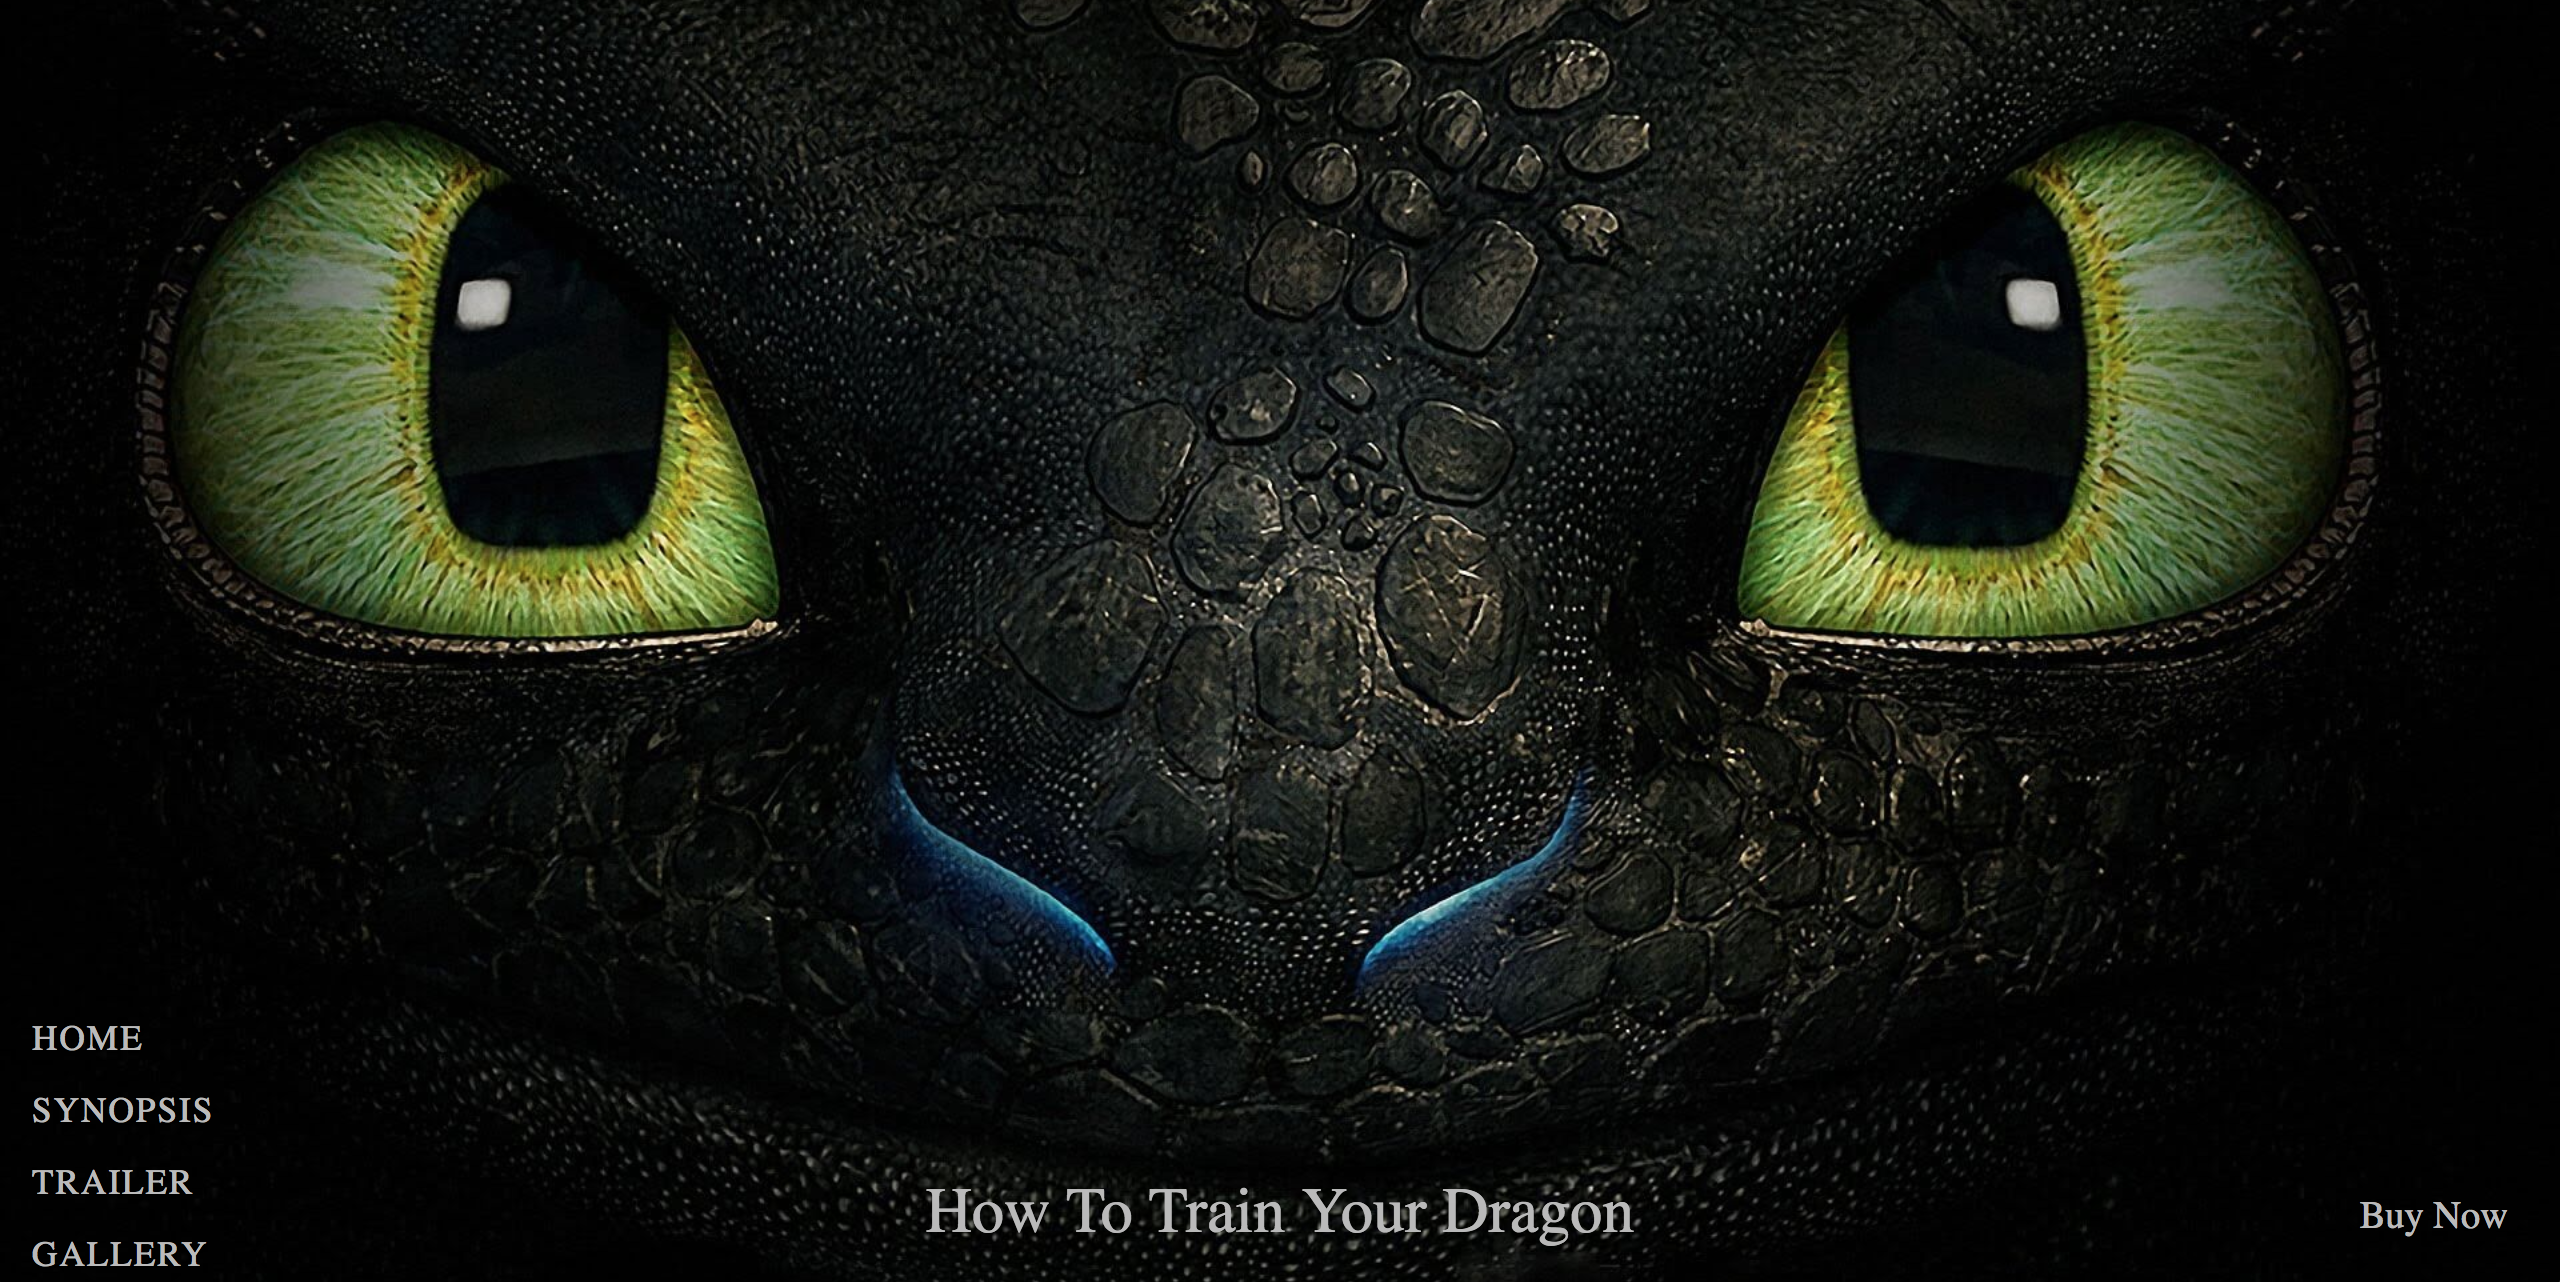 How To Train Your Dragon project